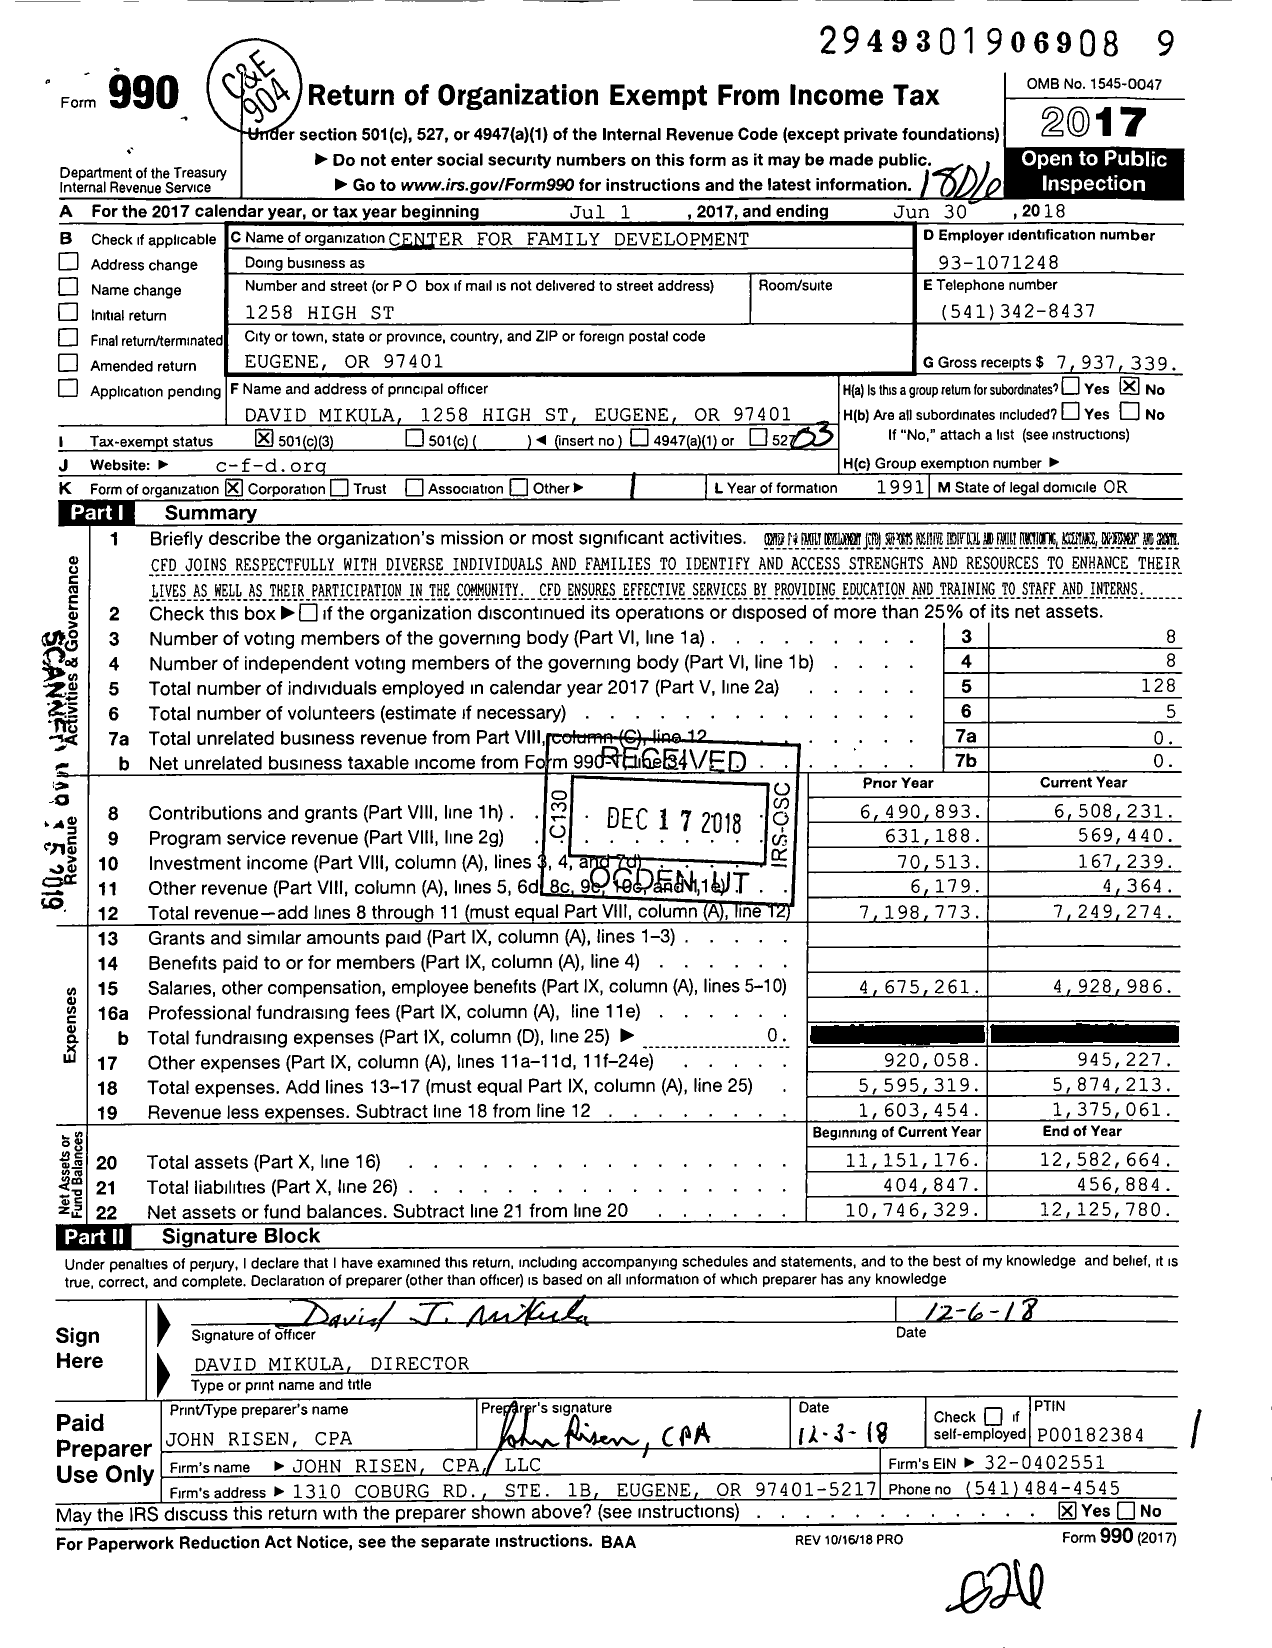 Image of first page of 2017 Form 990 for Center for Family Development (CFD)